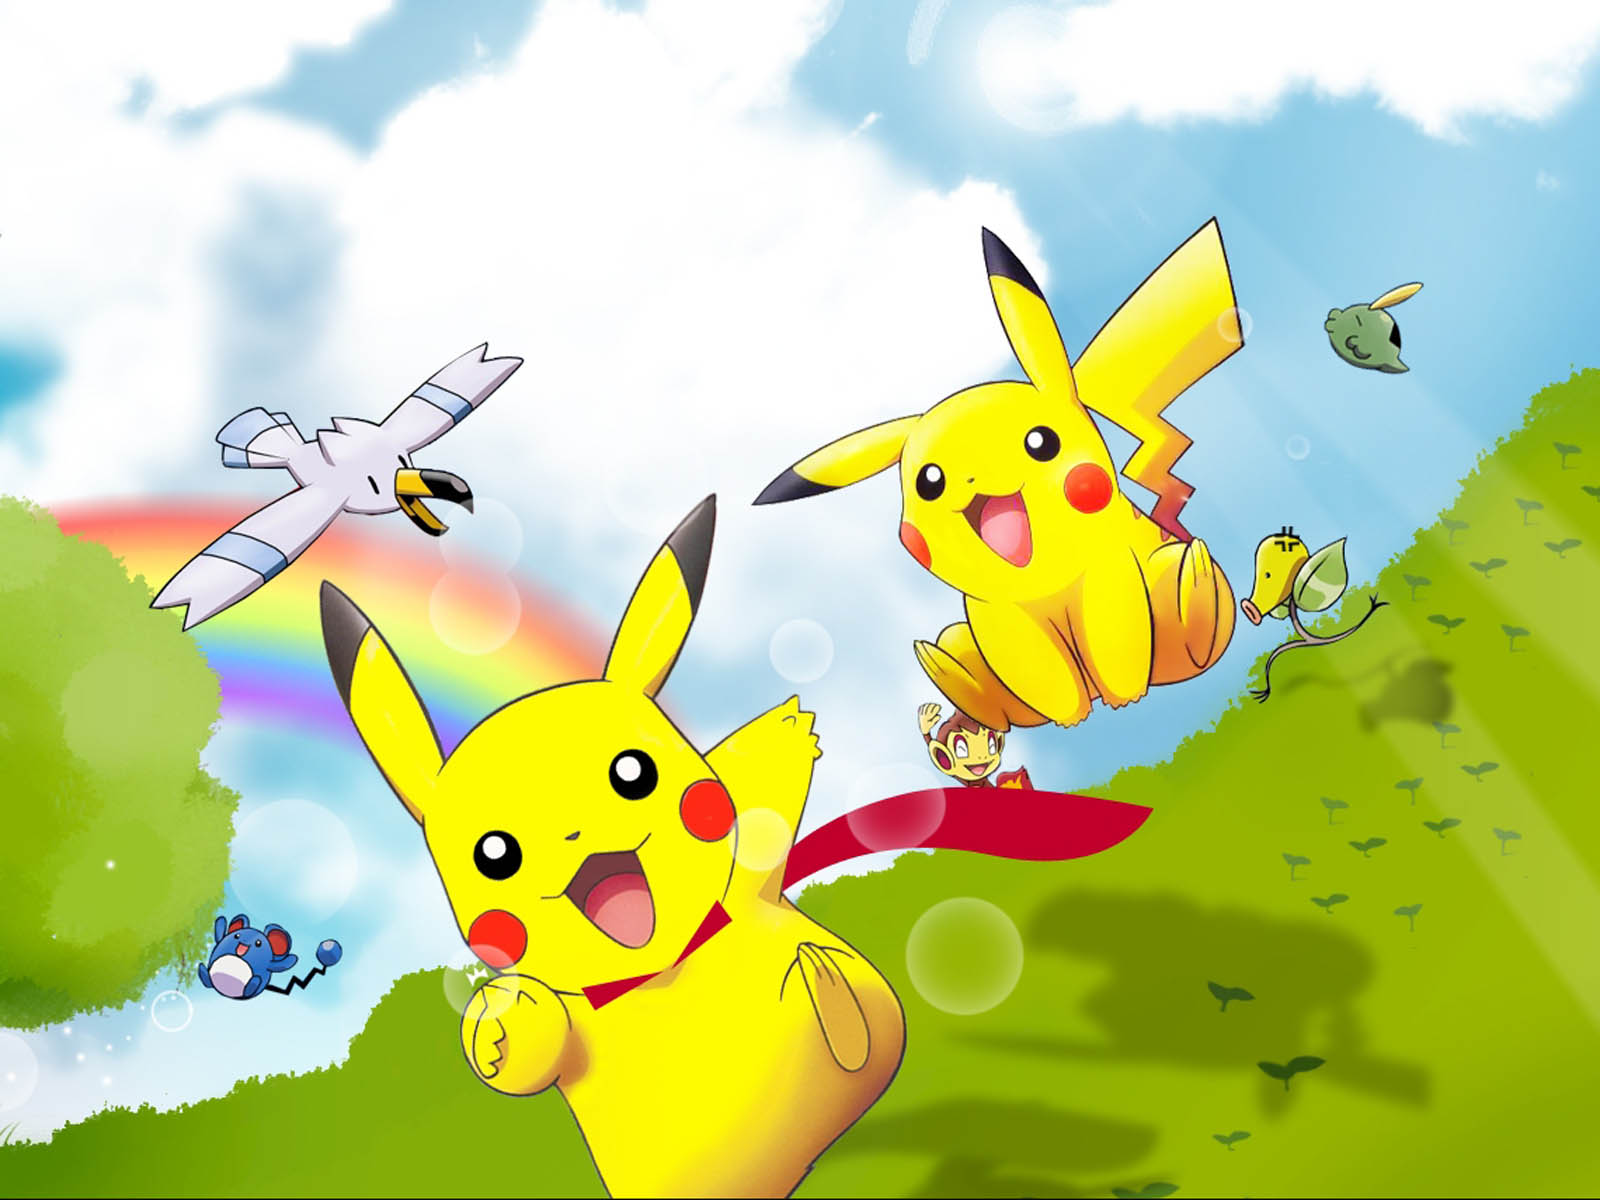 Tag Pikachu Pokemon Wallpaper Image Photos Pictures And Background